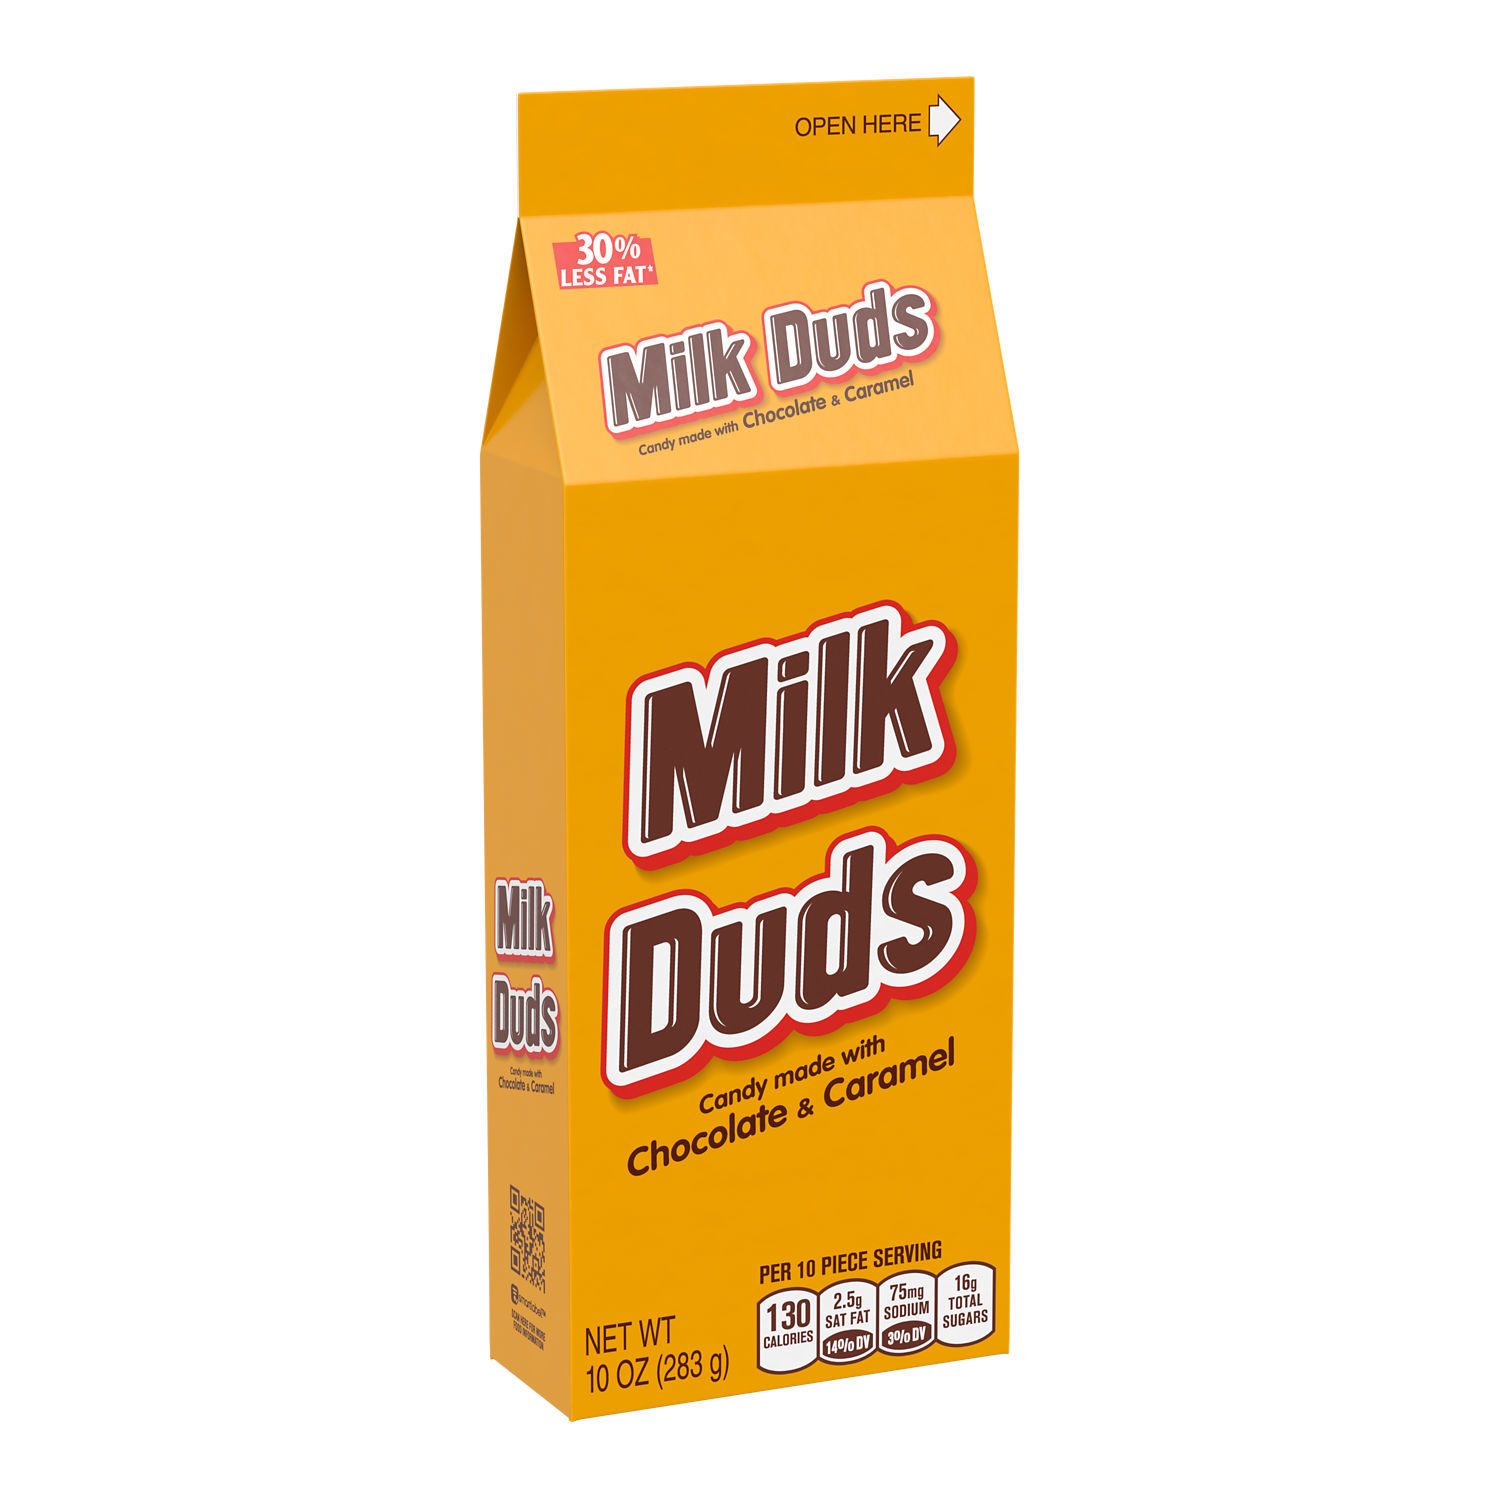 Milk Duds Chocolate and Caramel Candy, Box 10 oz - image 2 of 9